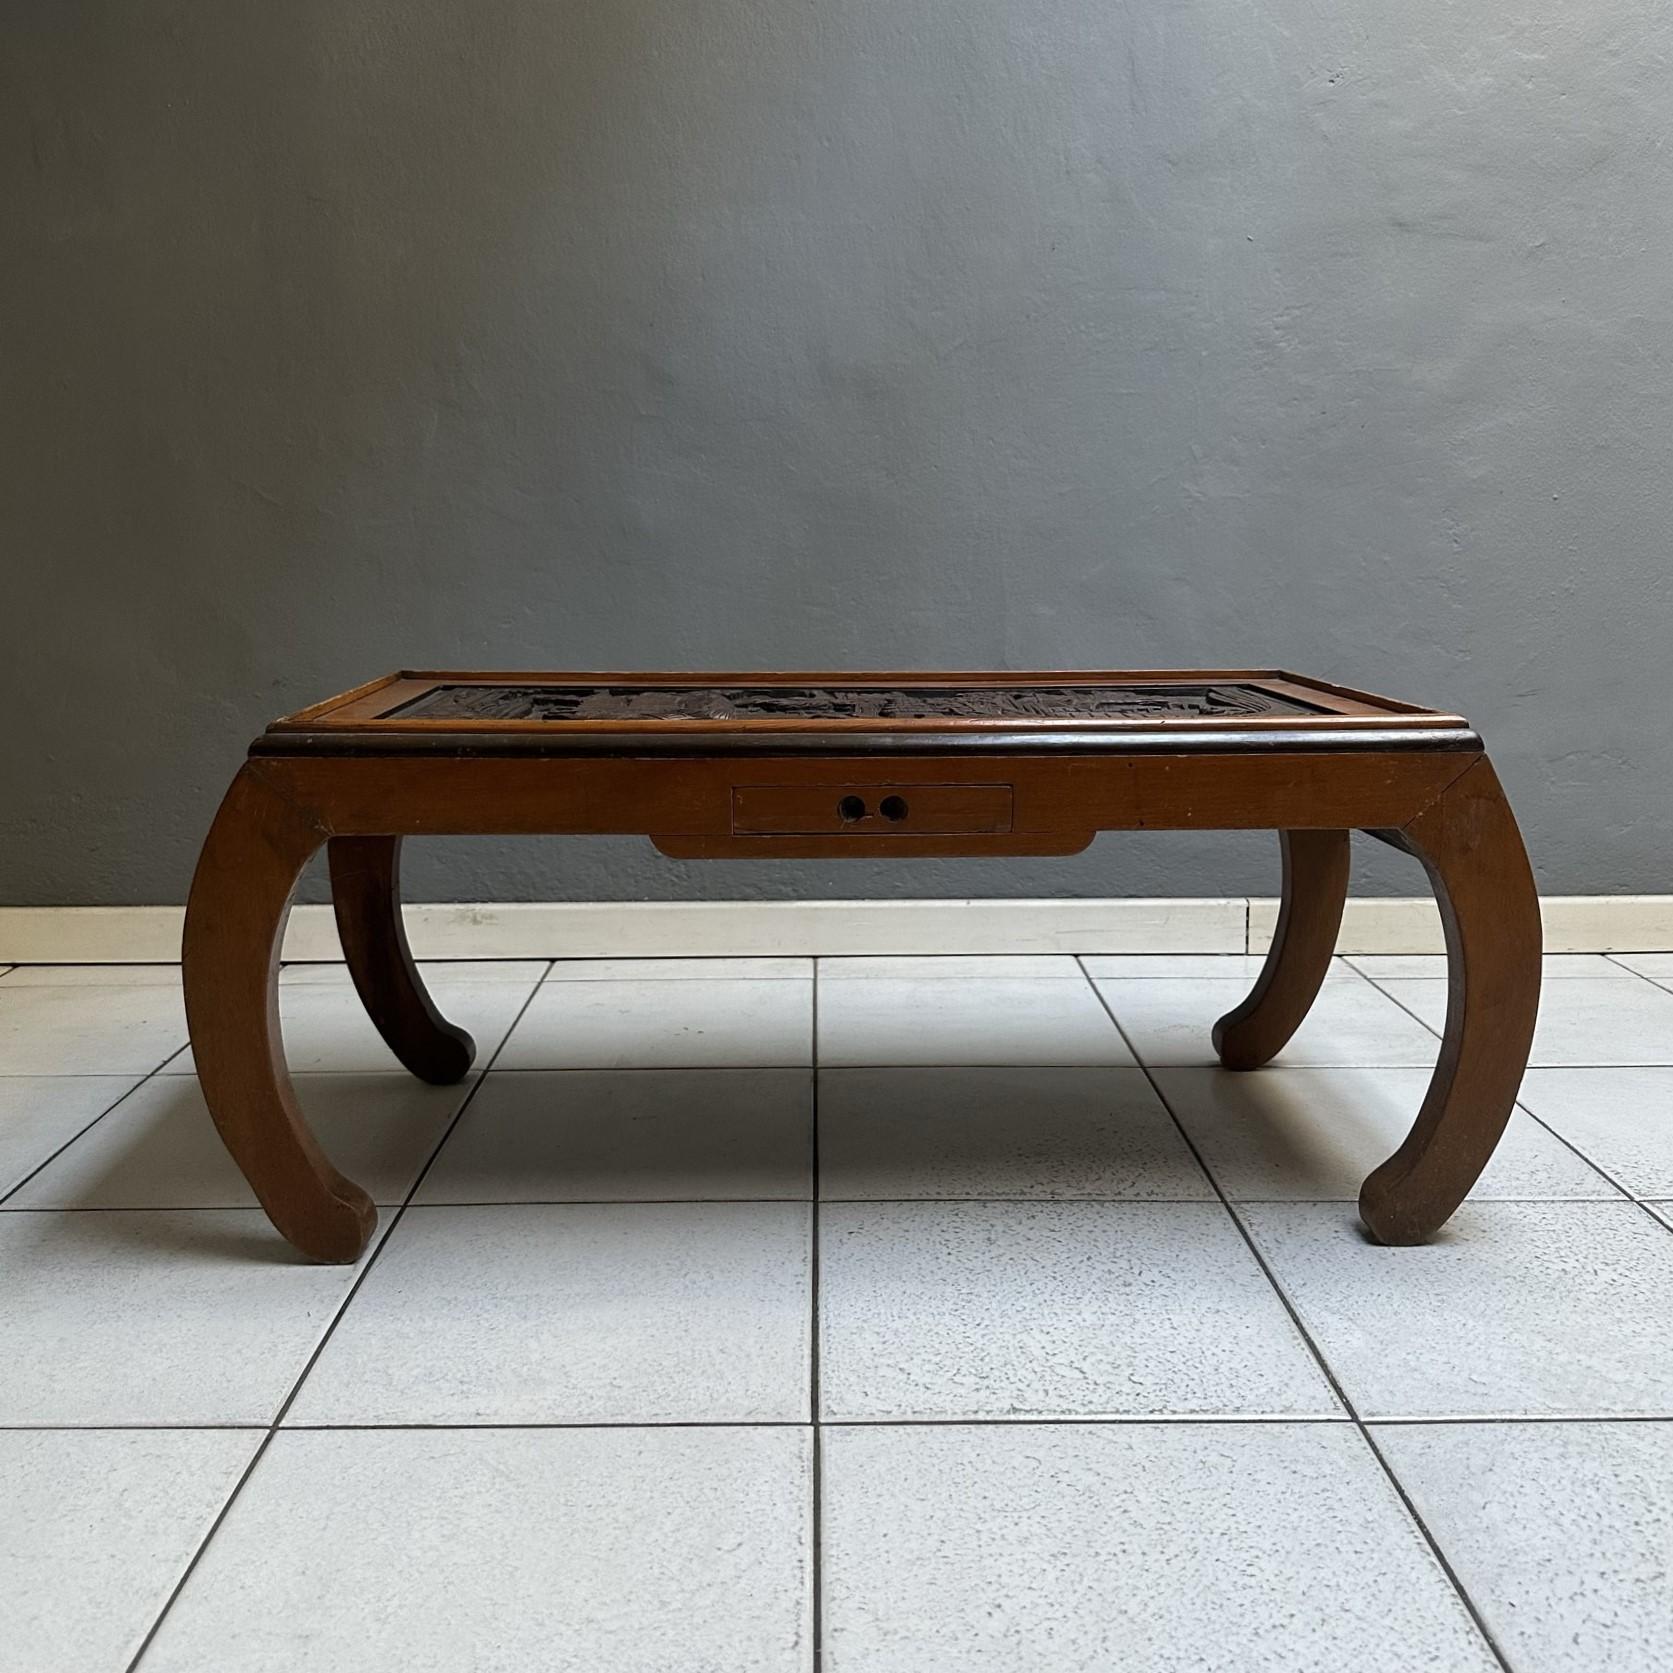 Rectangular coffee table from the seventies, Chinese manufacturing.
The structure is made of wood inlaid with typical oriental decorations, probably used as a tea table.
The table has a small drawer on the front. From the photo you can see the signs